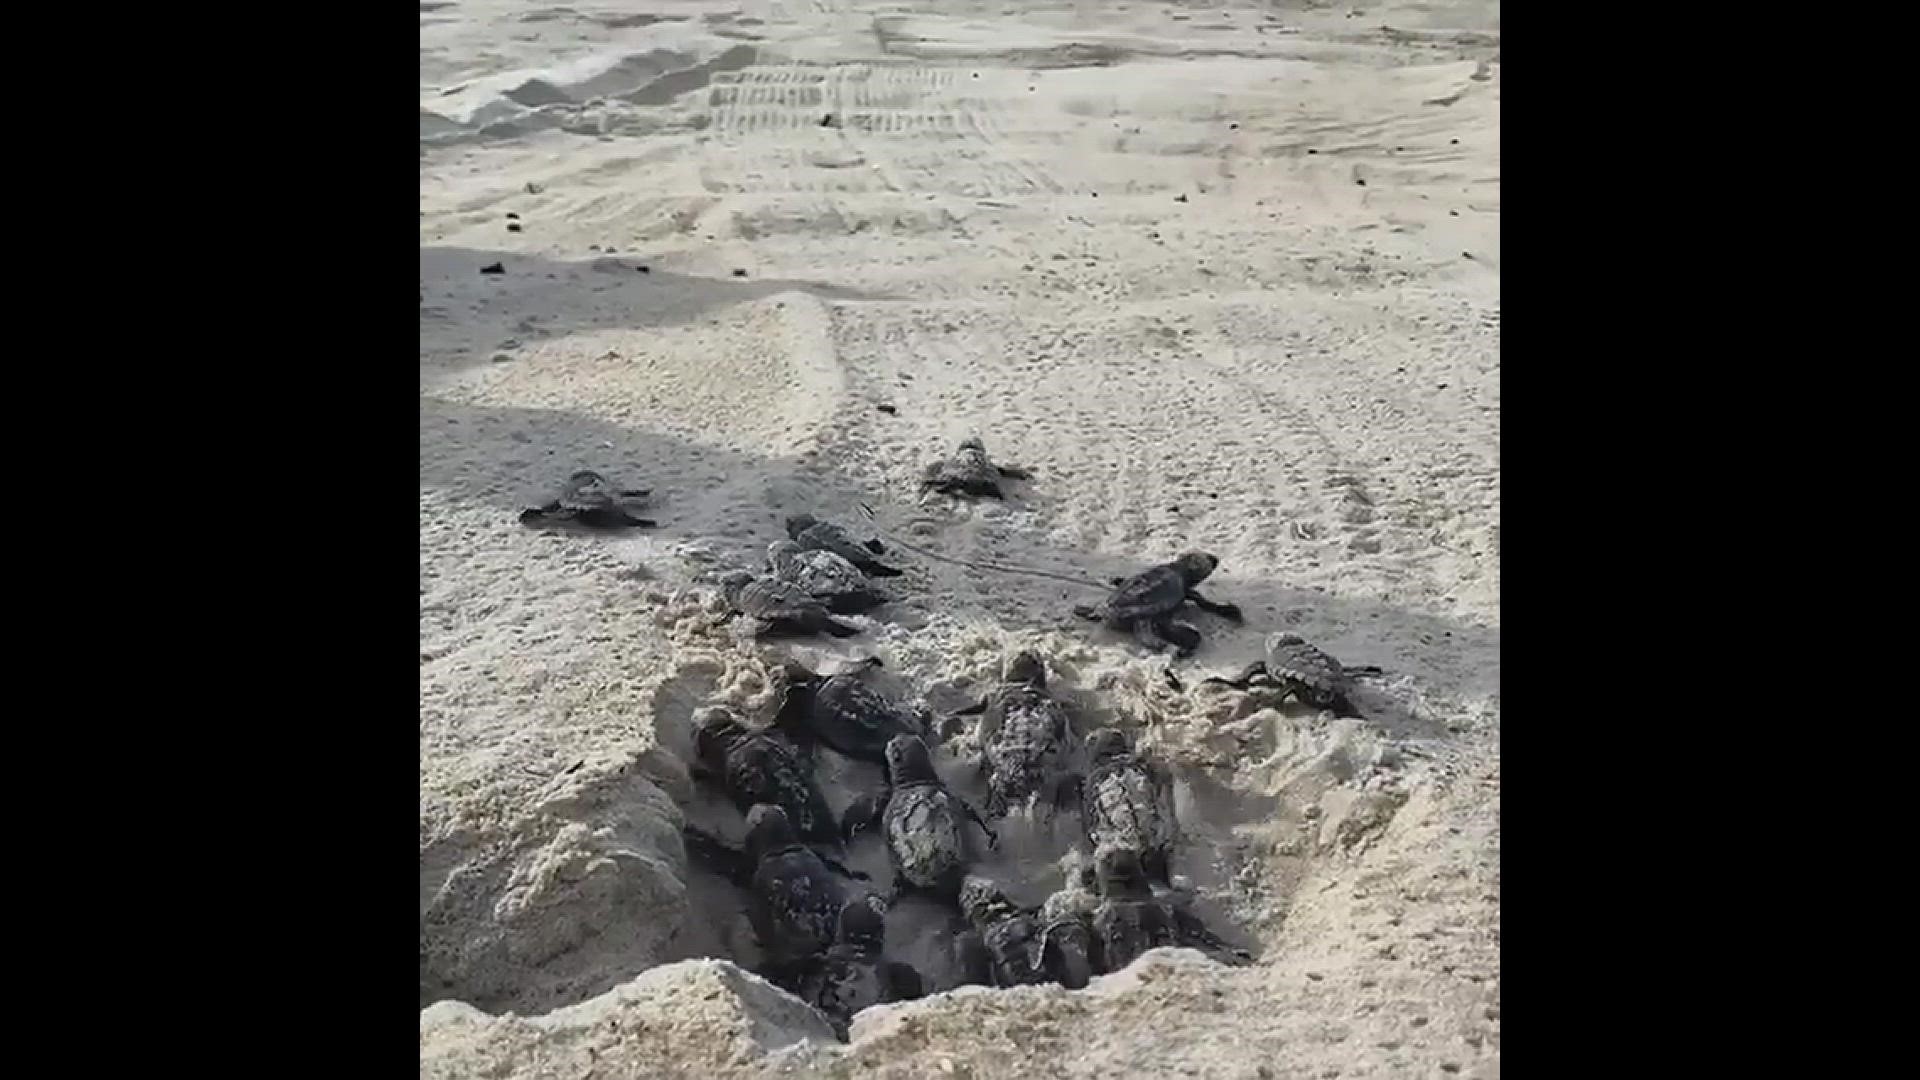 This nest on Hatteras Island had 64 baby sea turtles "boil" out. Video courtesy of Cape Hatteras National Seashore.